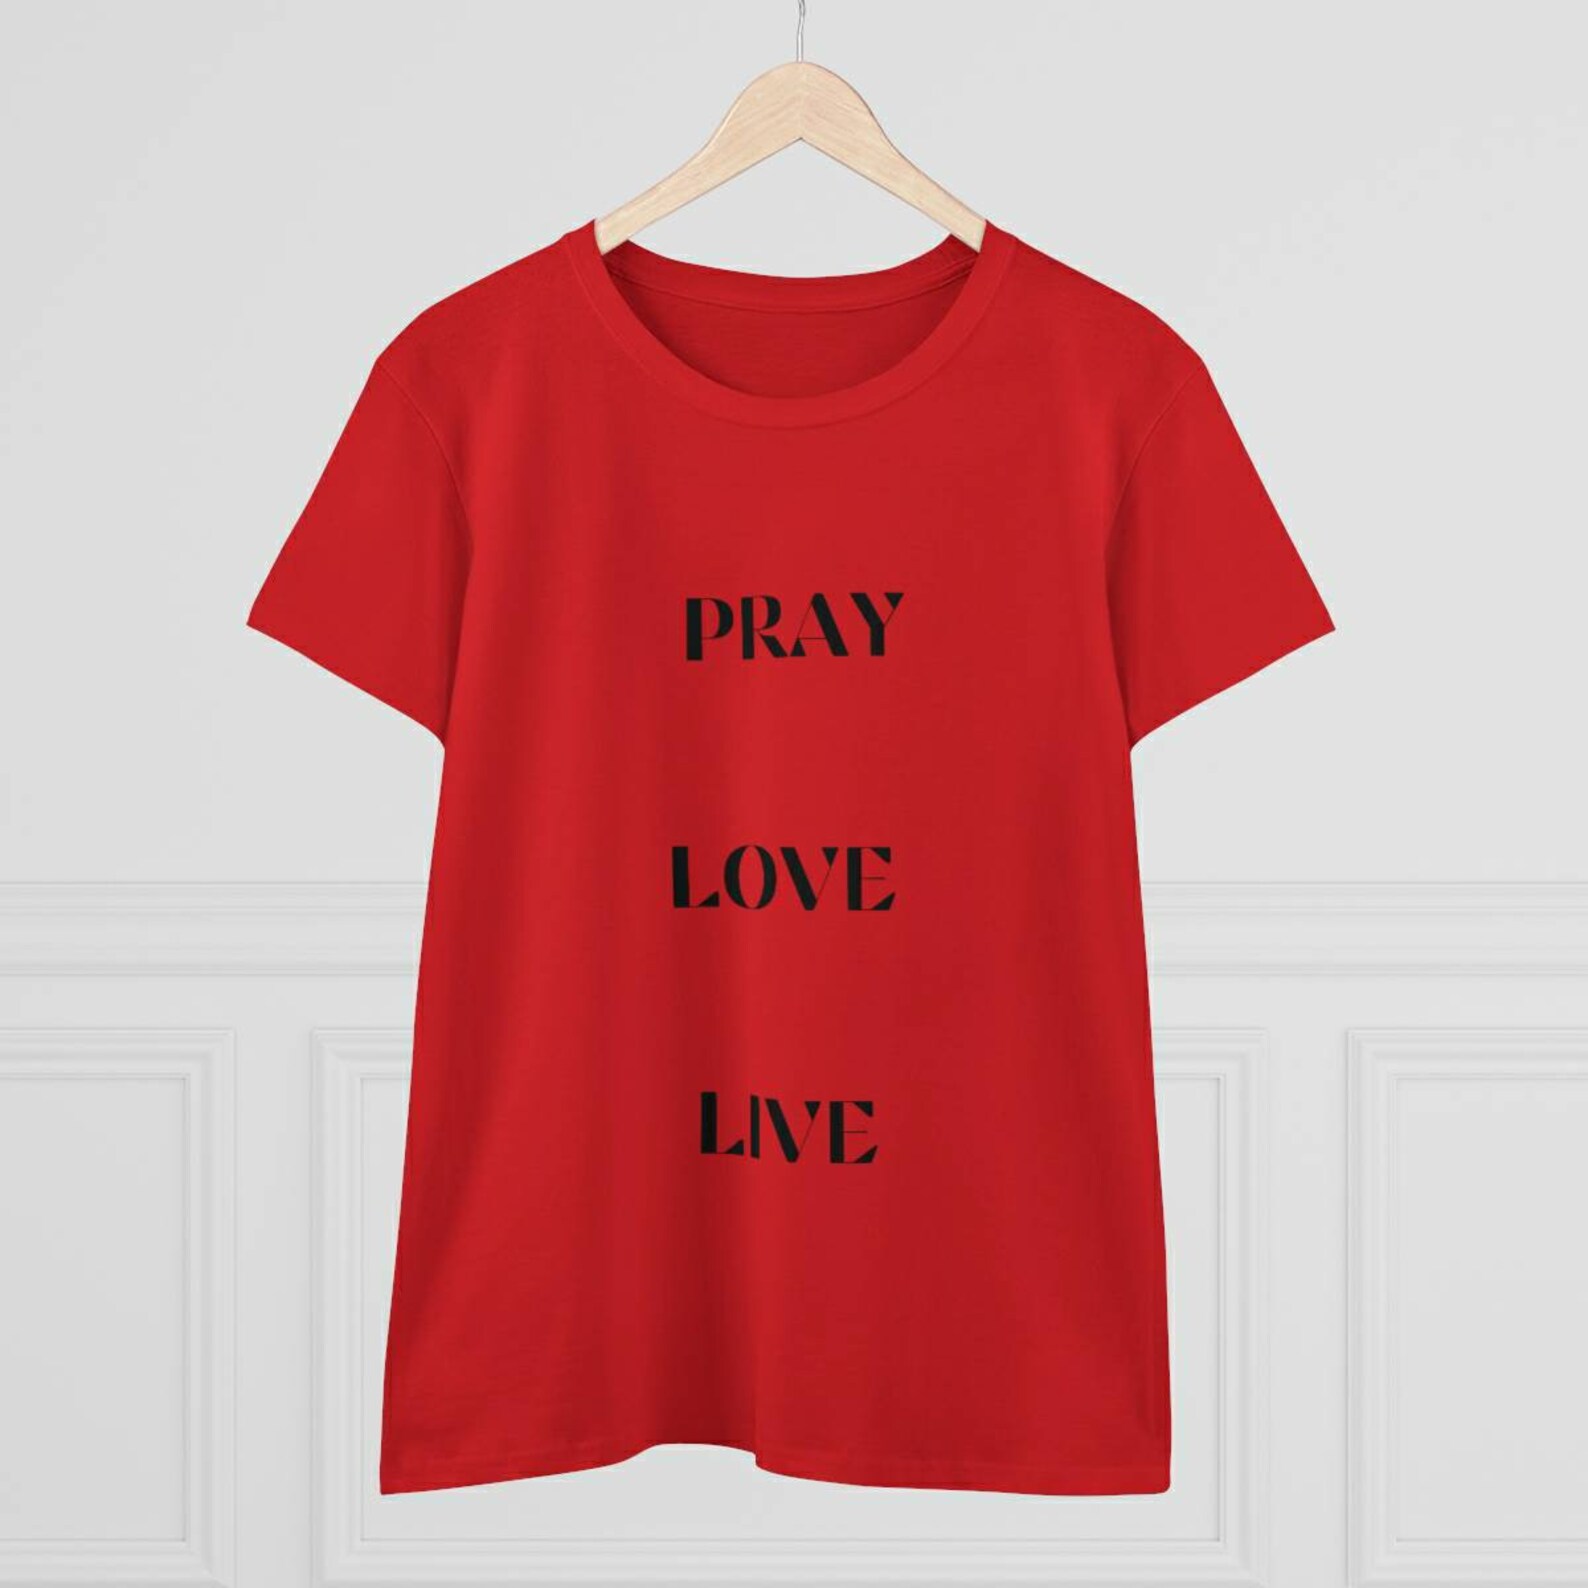 Pray Love Live red Woman's t-shirt/tee. Christian Woman | Etsy